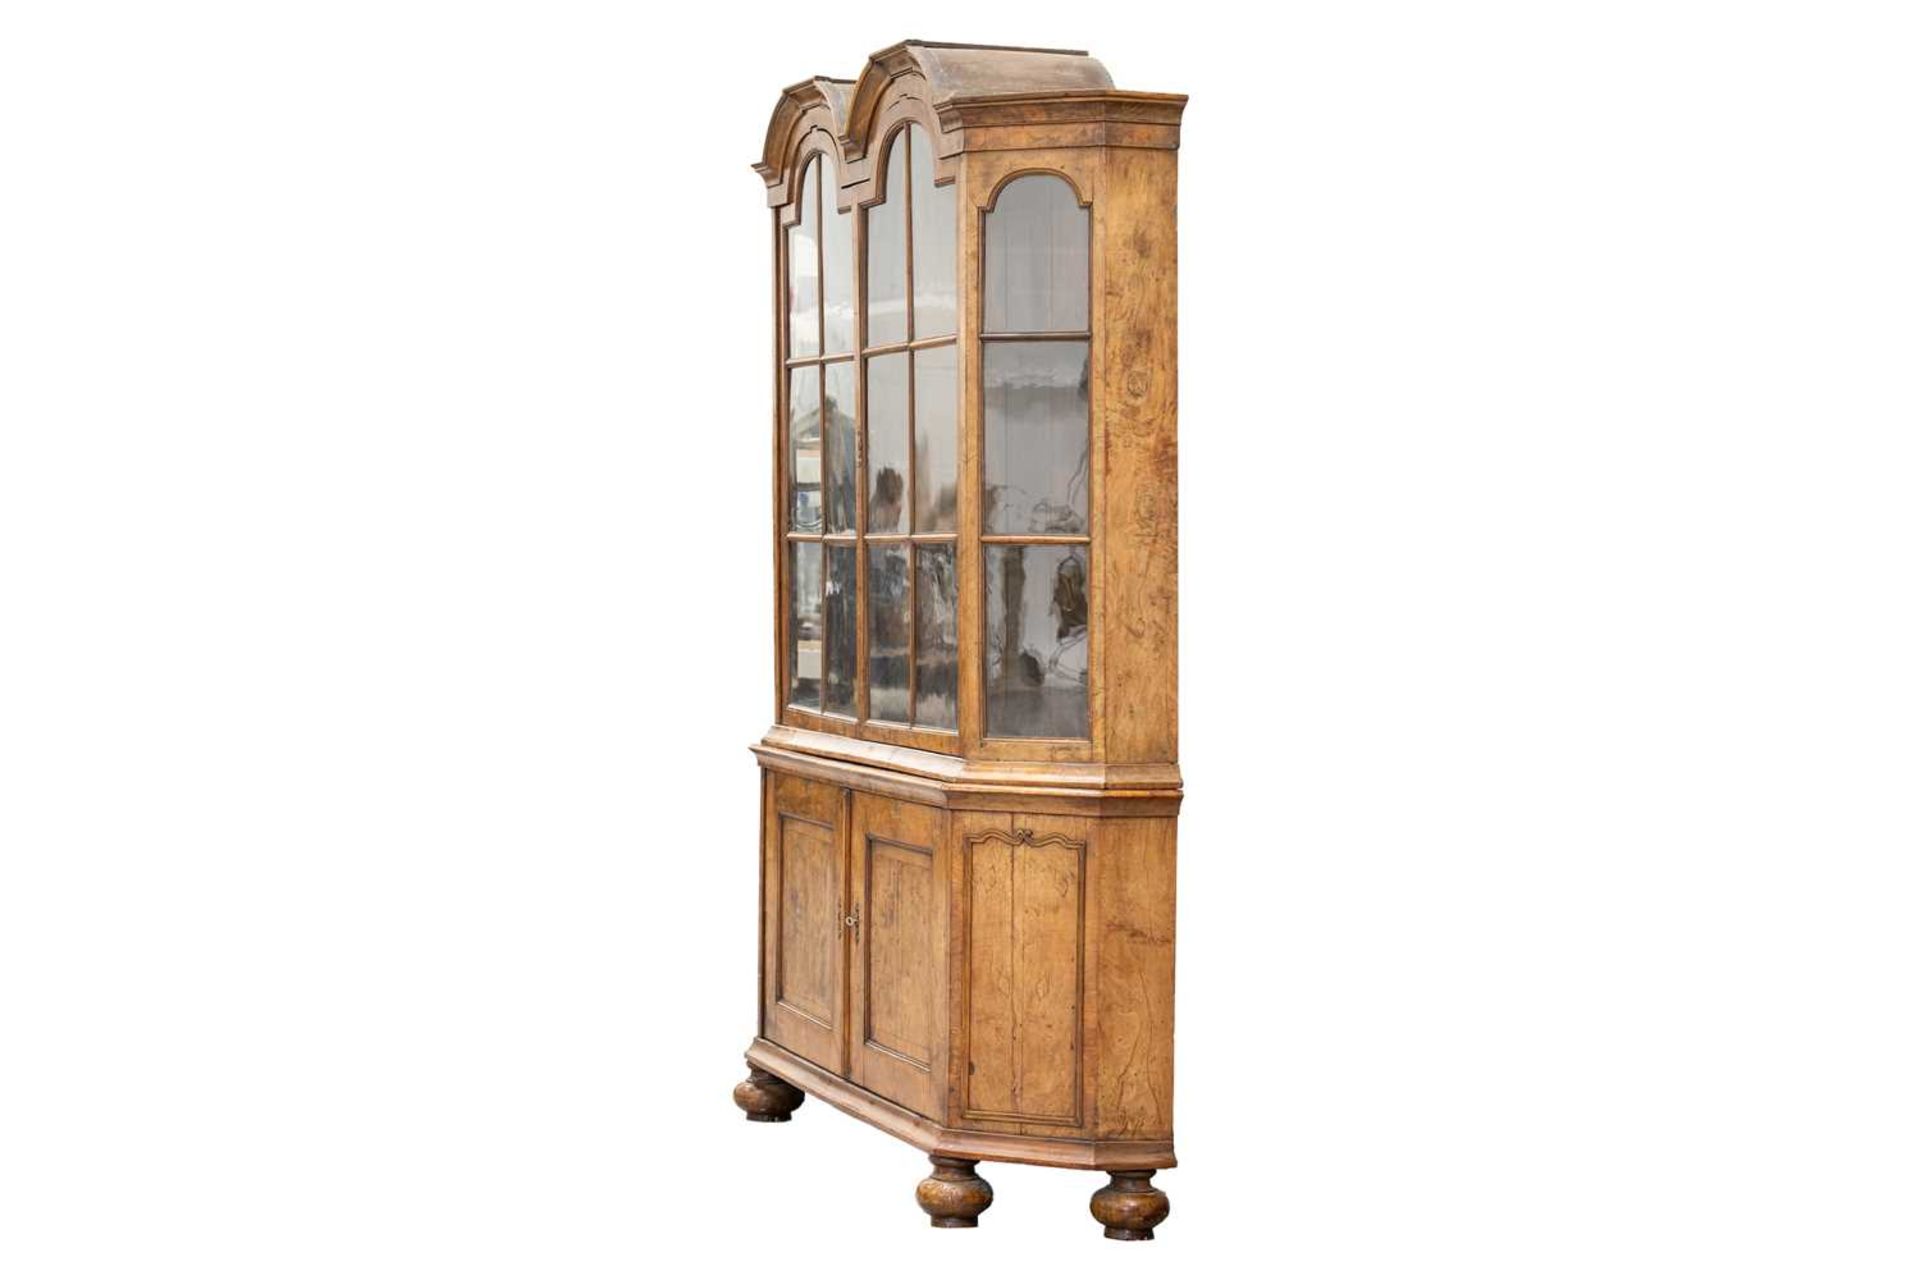 An early 18th-century style figured walnut double domed Dutch "Delft" canted display cabinet, early  - Image 2 of 10